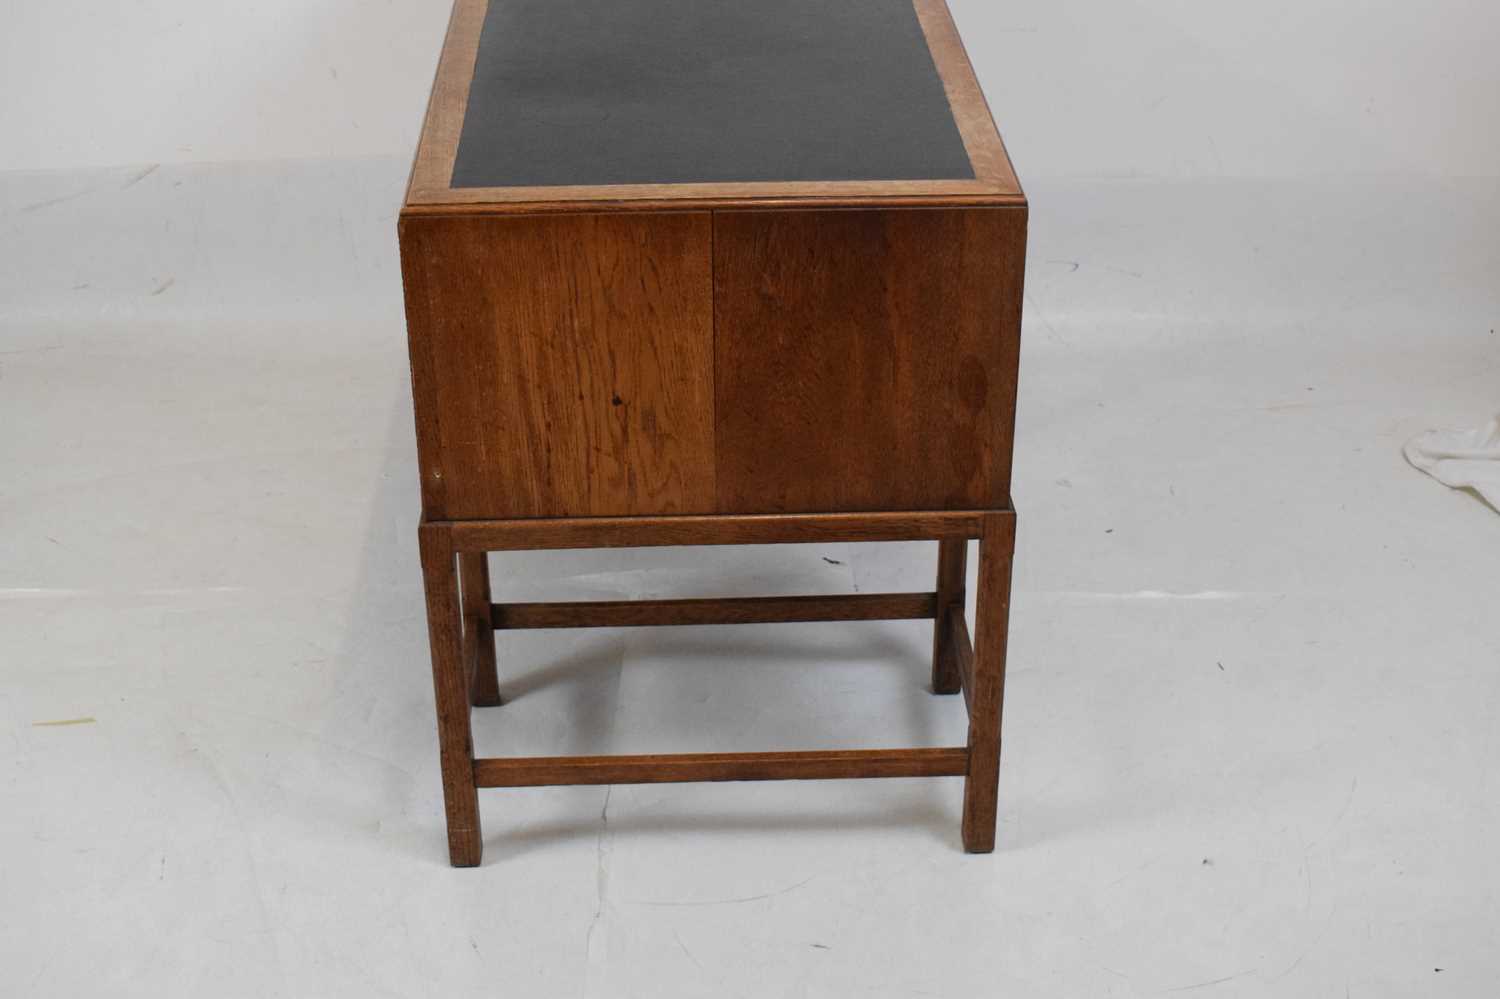 1920s Arts and Crafts oak desk, in the style of Gordon Russell of Broadway - Image 2 of 4